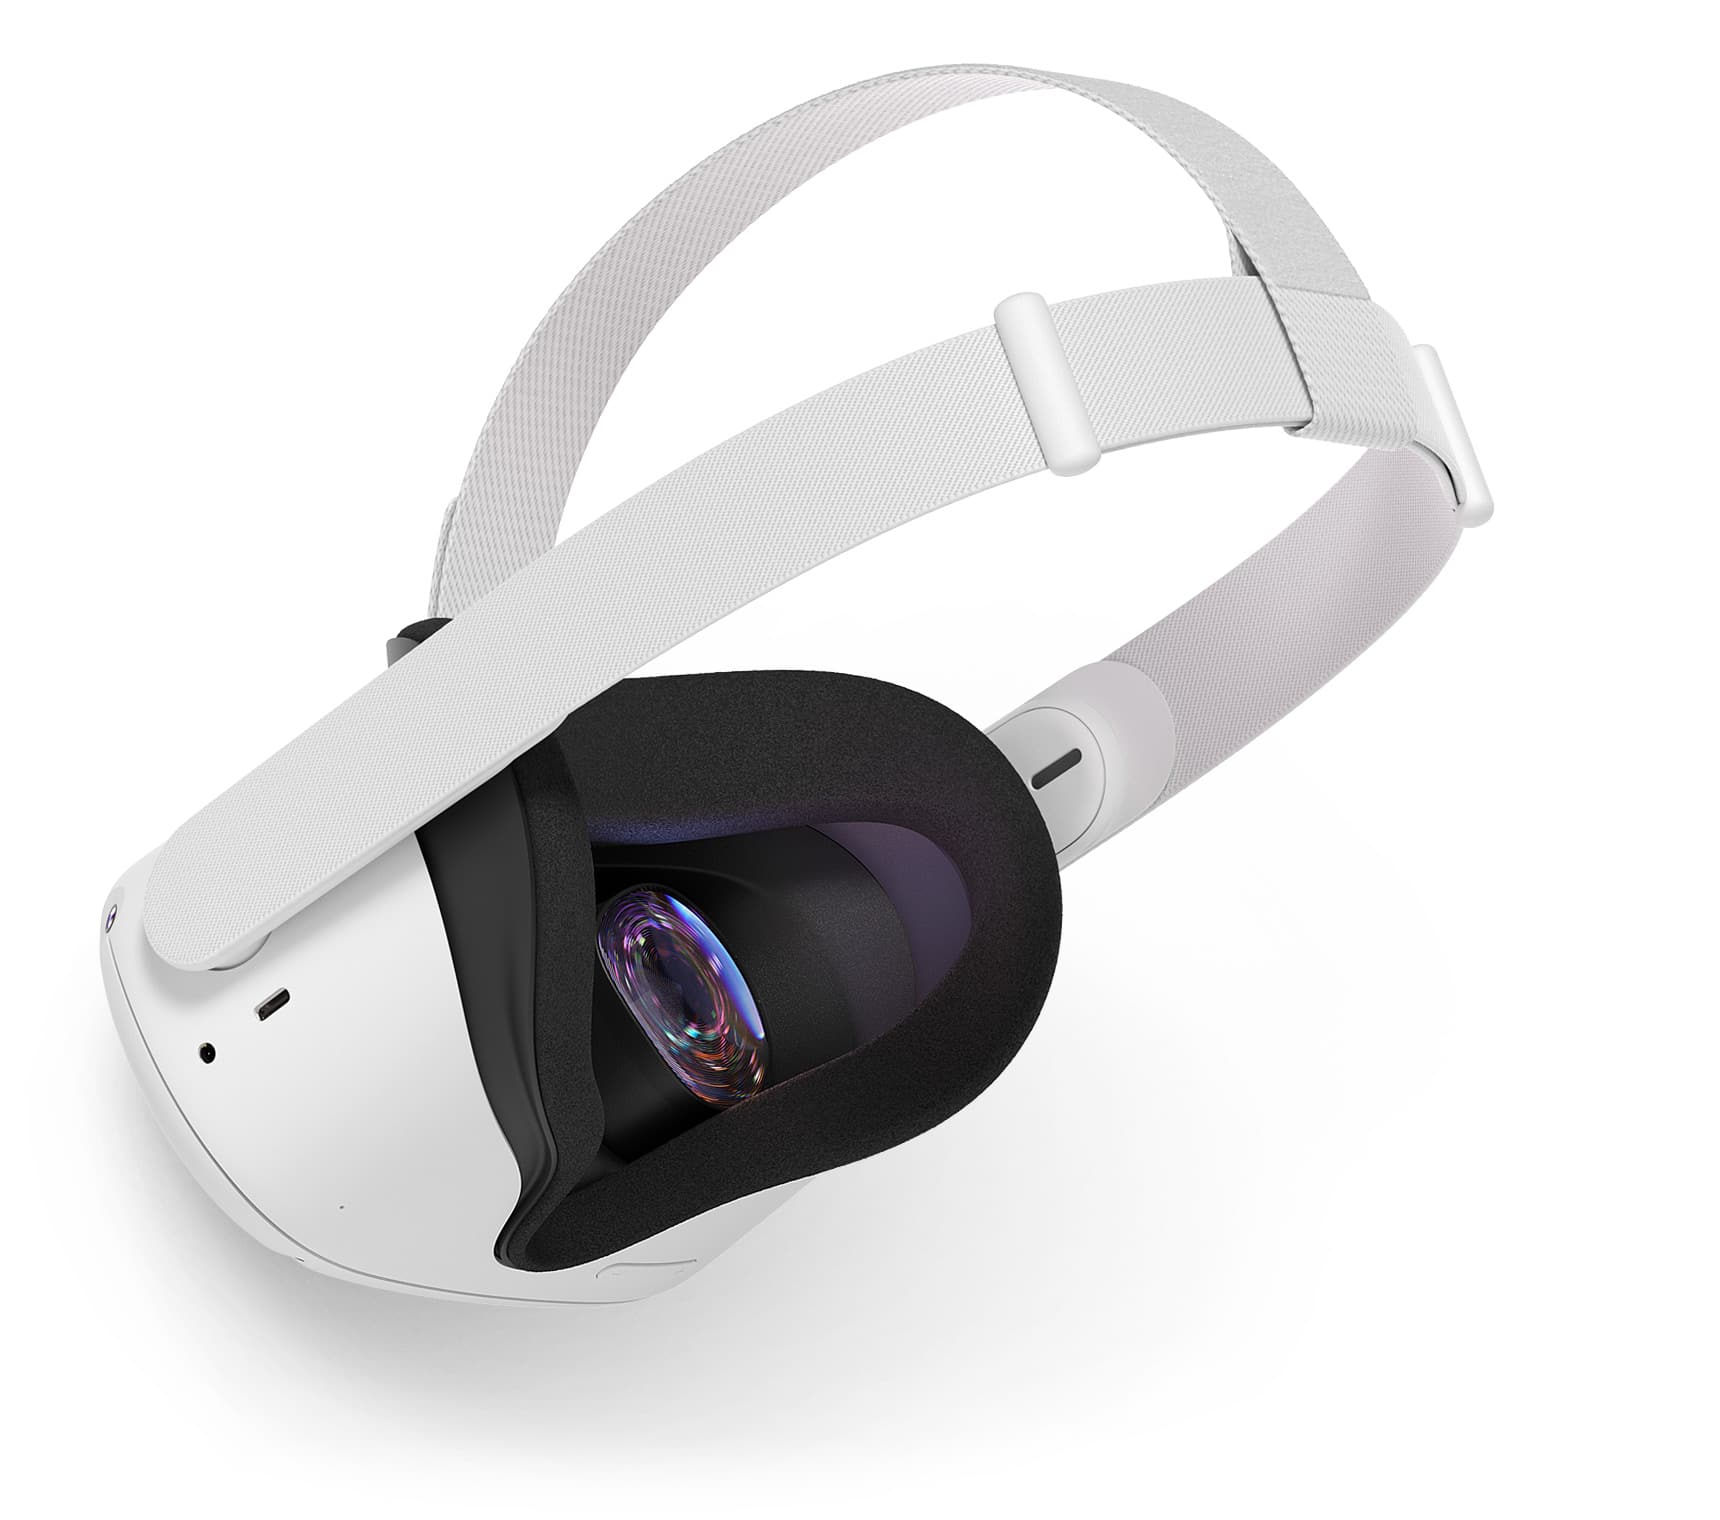 301-00350-01 - $395 - Oculus Quest 2 Advanced All-In-One Virtual